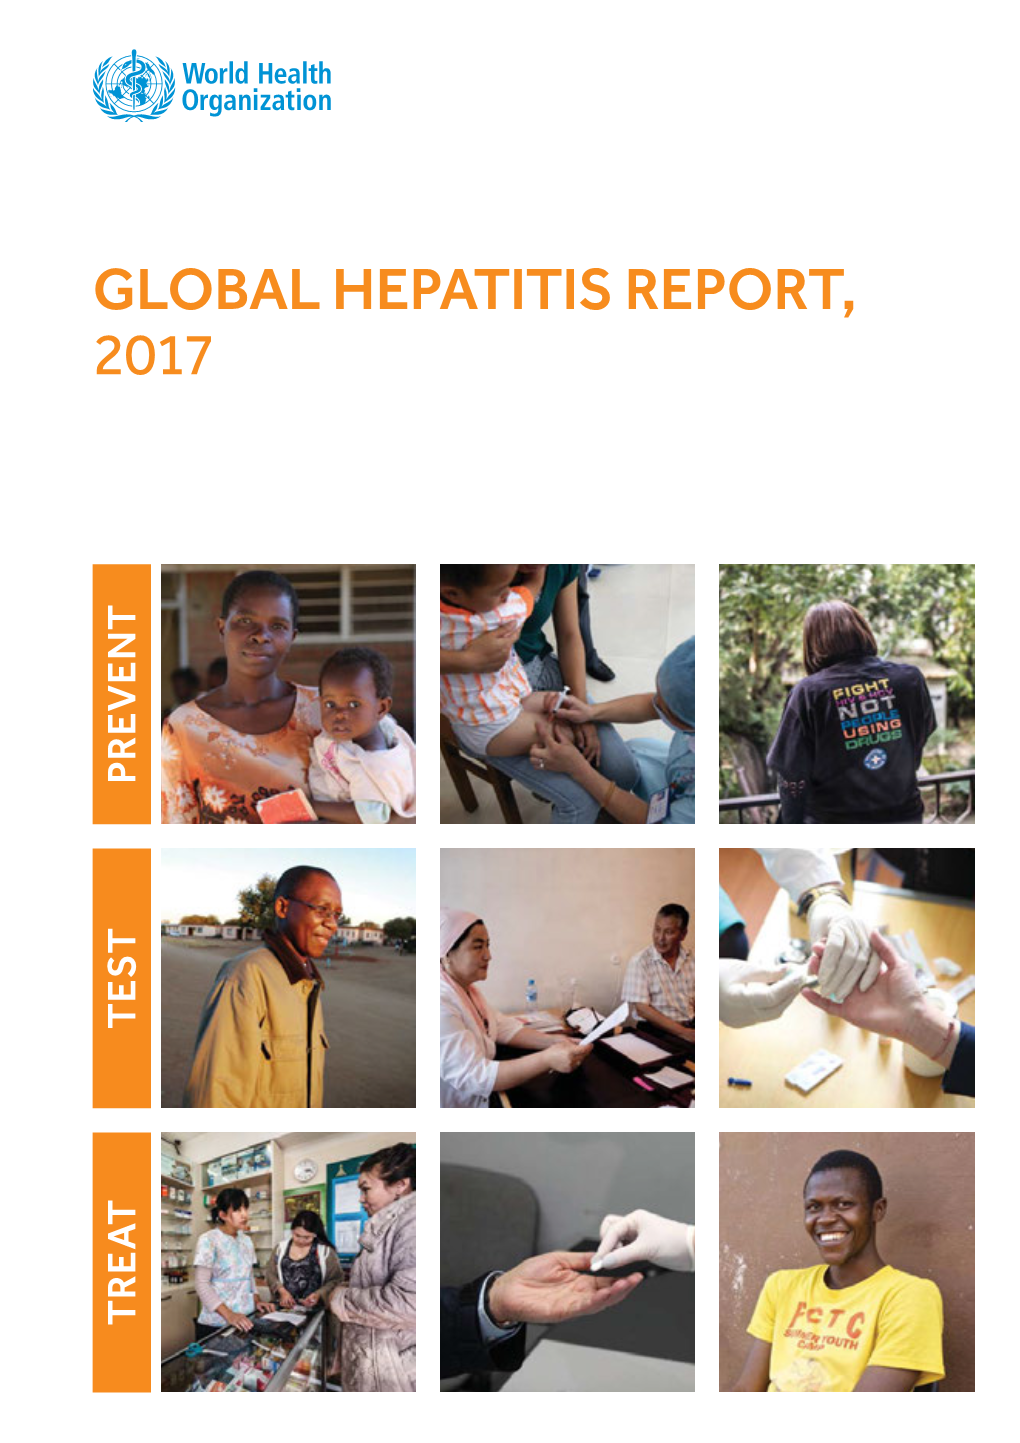 Global Hepatitis Report 2017 ISBN 978-92-4-156545-5 © World Health Organization 2017 Some Rights Reserved